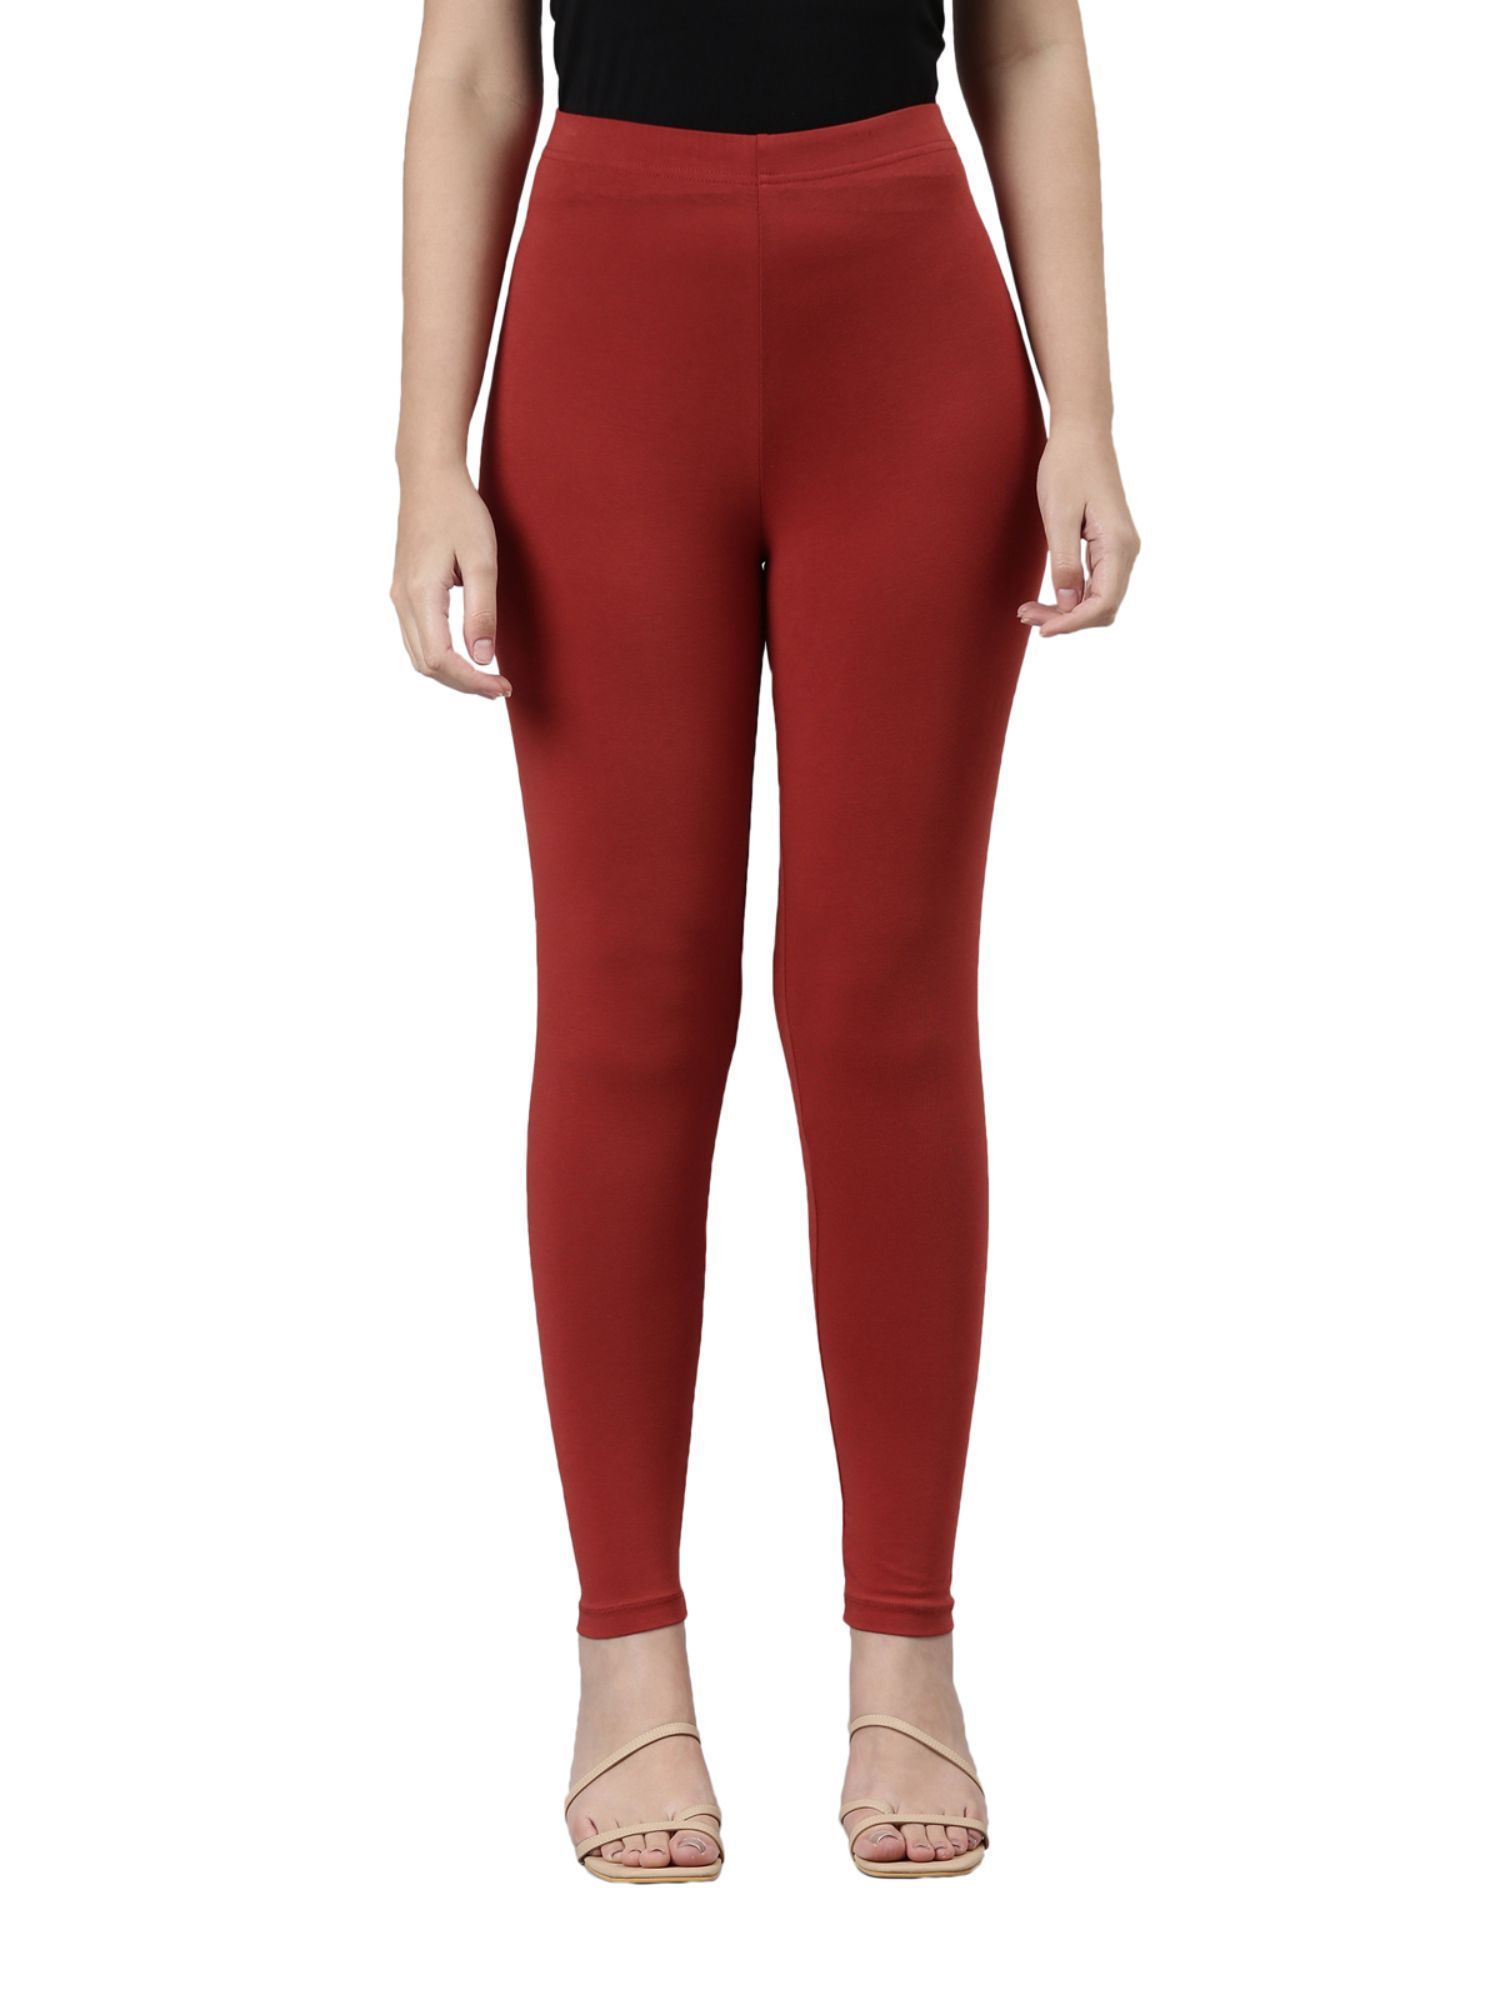 WOMEN'S EXTRA STRETCH CROPPED LEGGINGS PANTS | UNIQLO IN